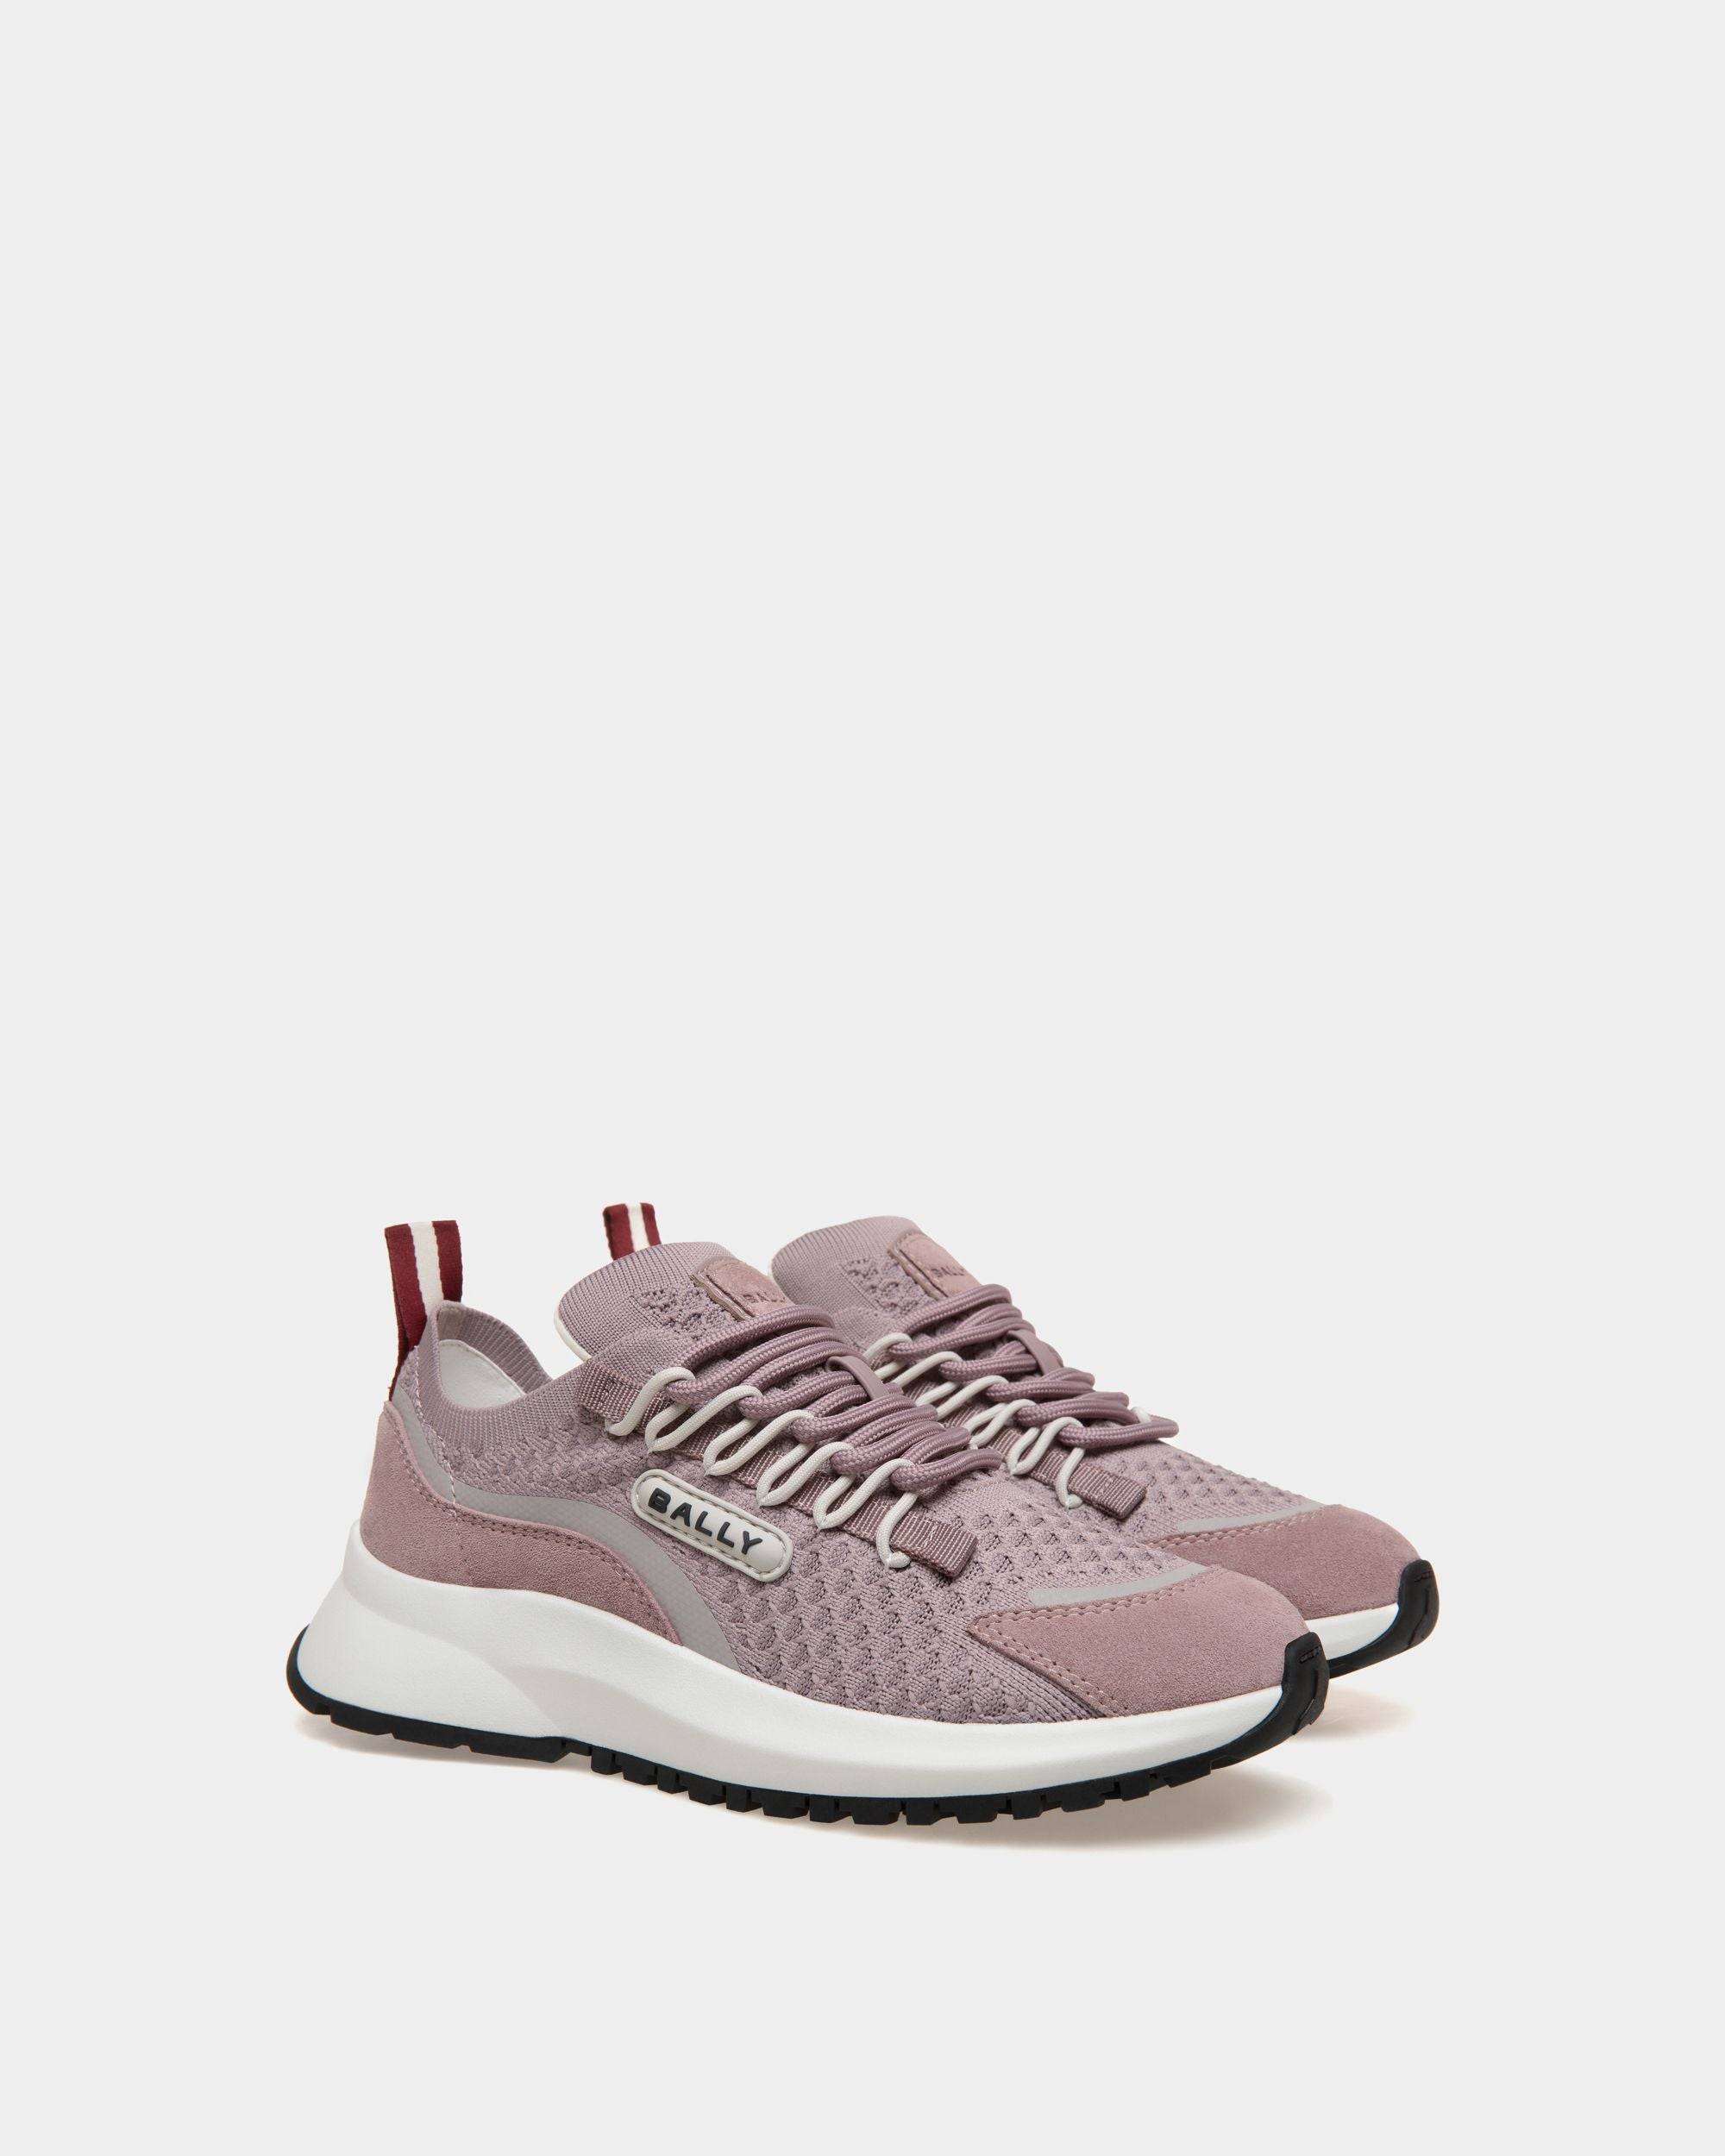 Outline | Women's Low-top Sneaker in Lilac Knit Fabric | Bally | Still Life 3/4 Front